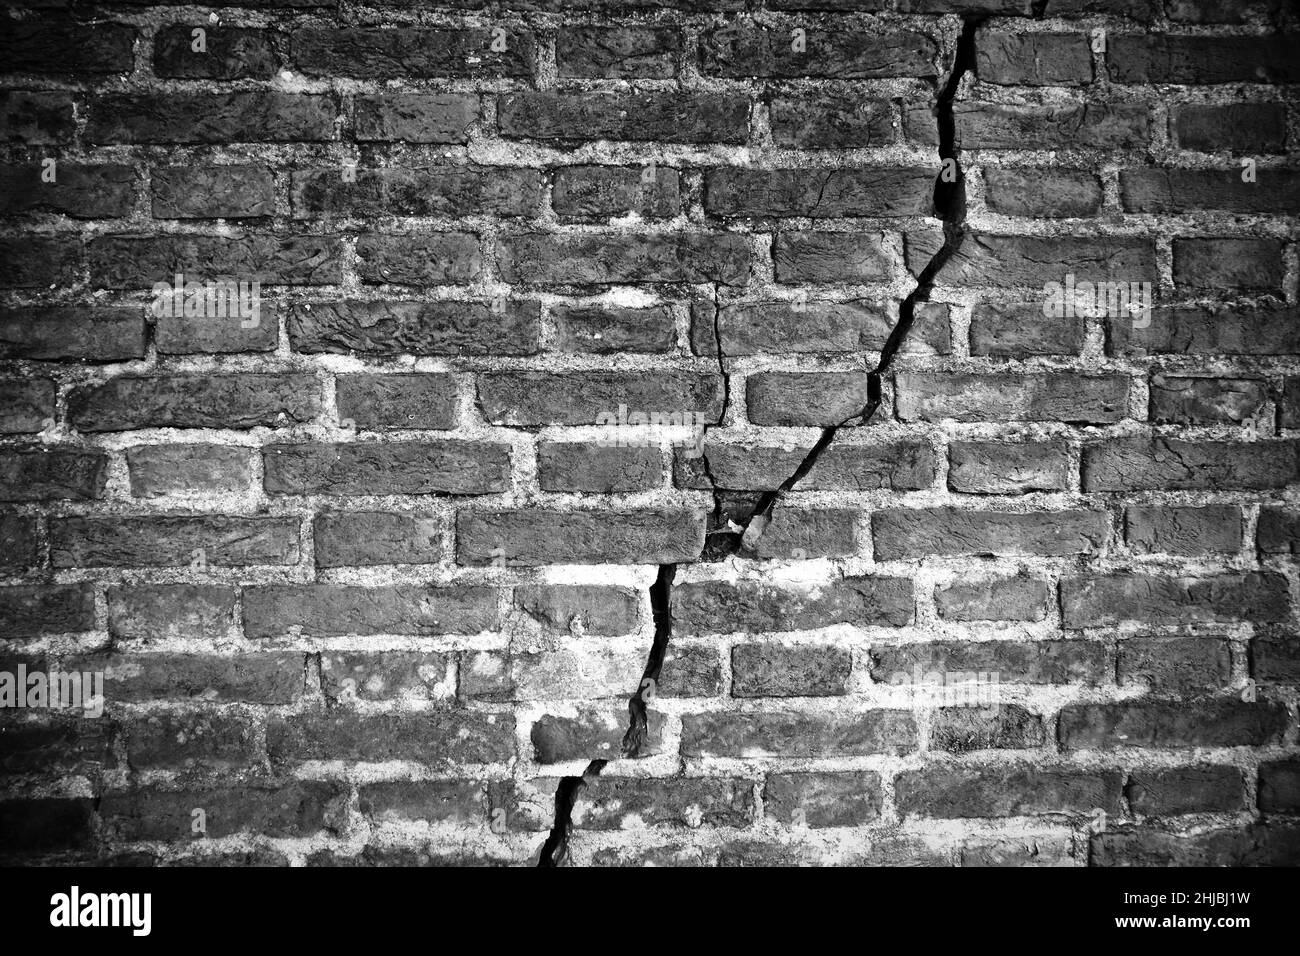 Old brick wall cracked and damaged - image with copy space Stock Photo